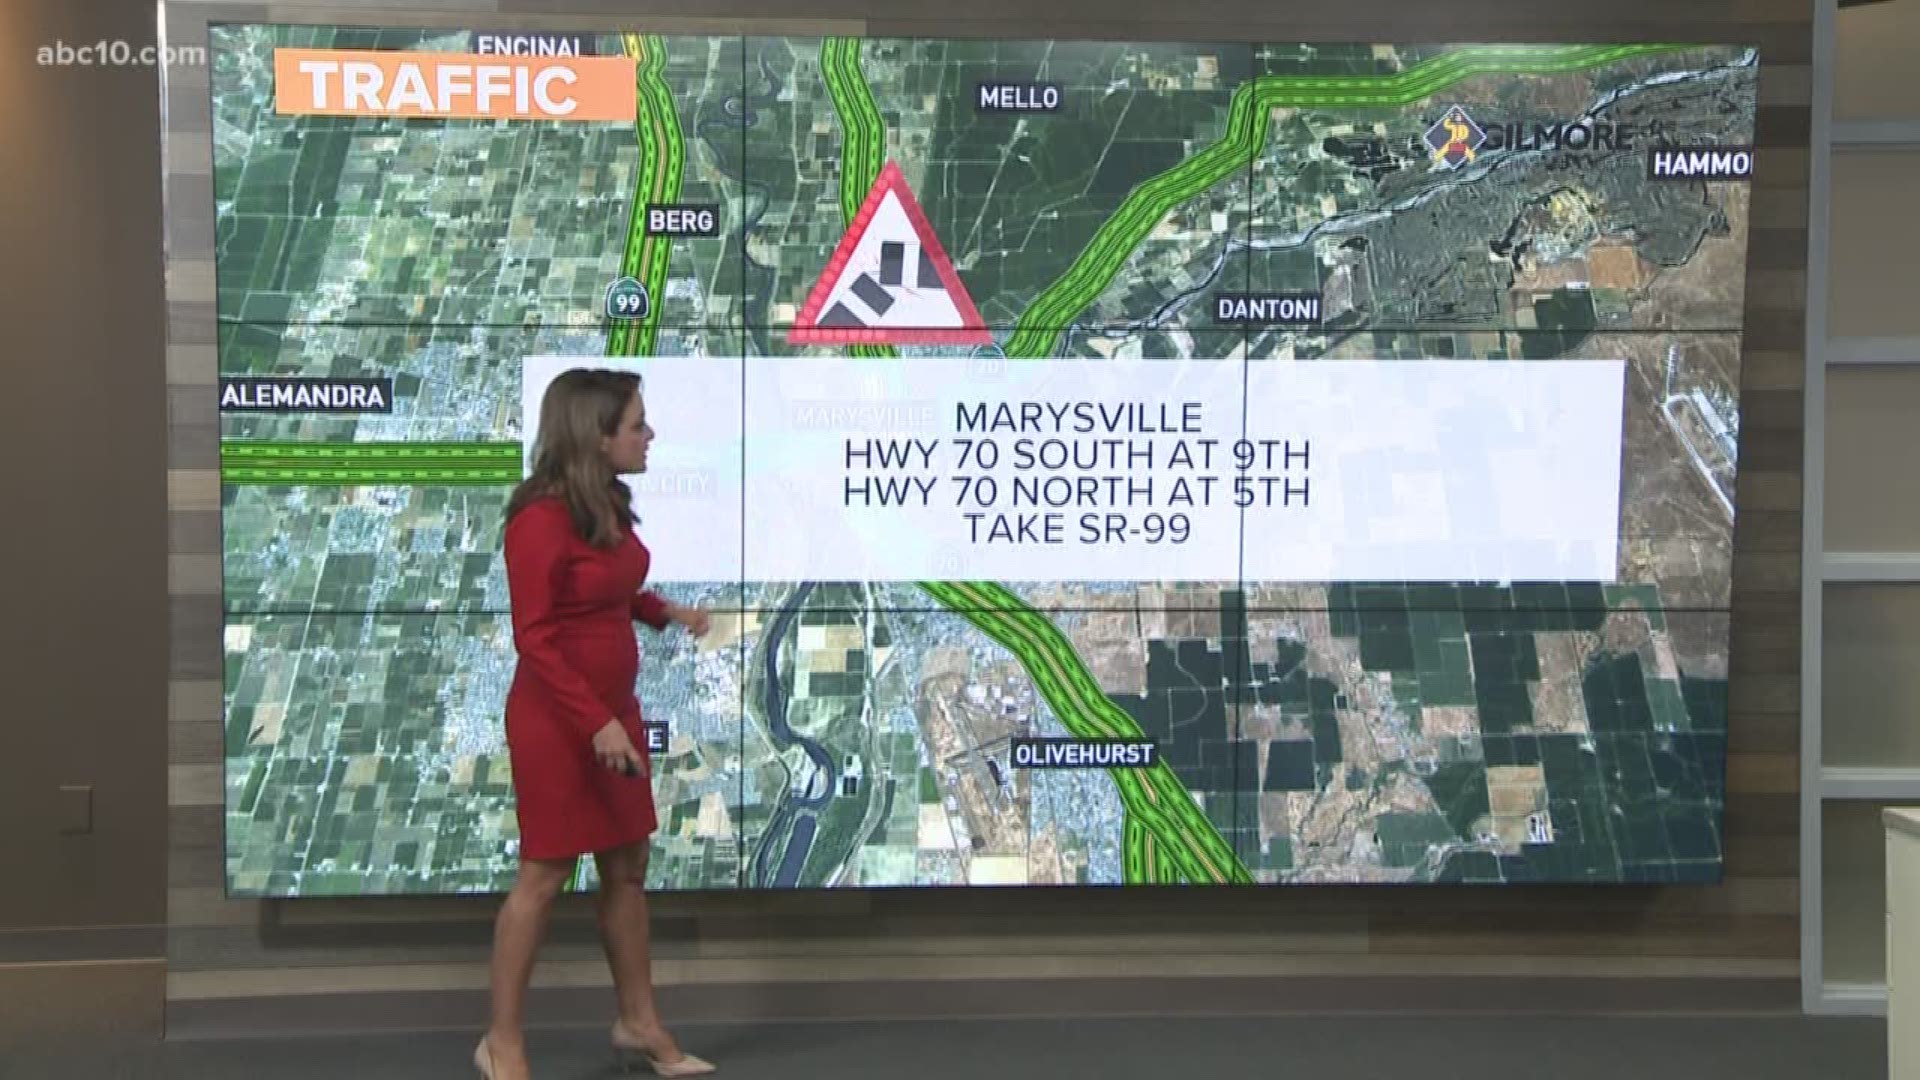 Heads up to commuters in Marysville!